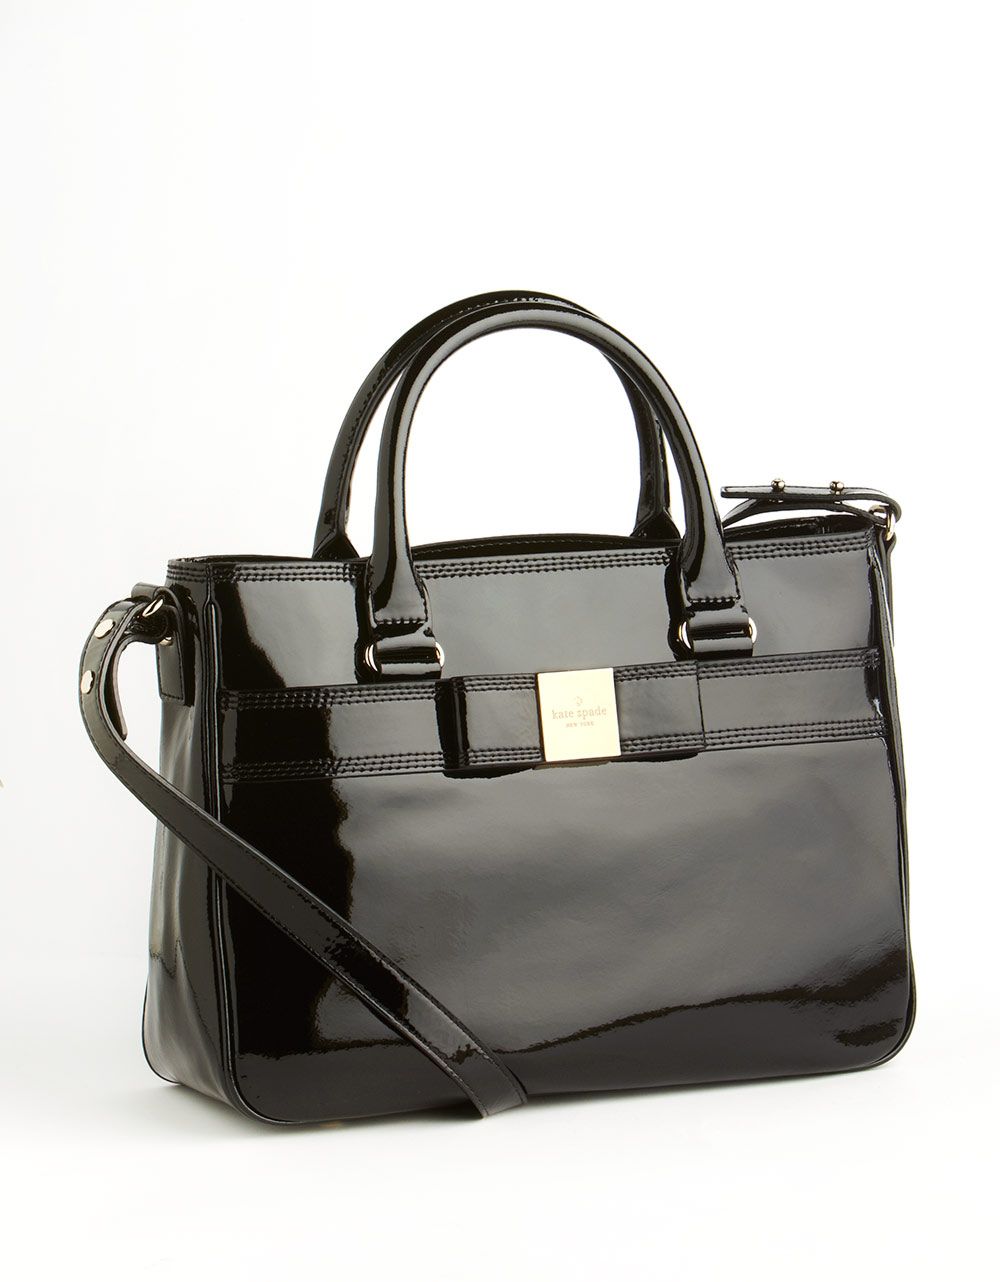 Kate Spade Patent Leather Satchel Bag in Black - Lyst